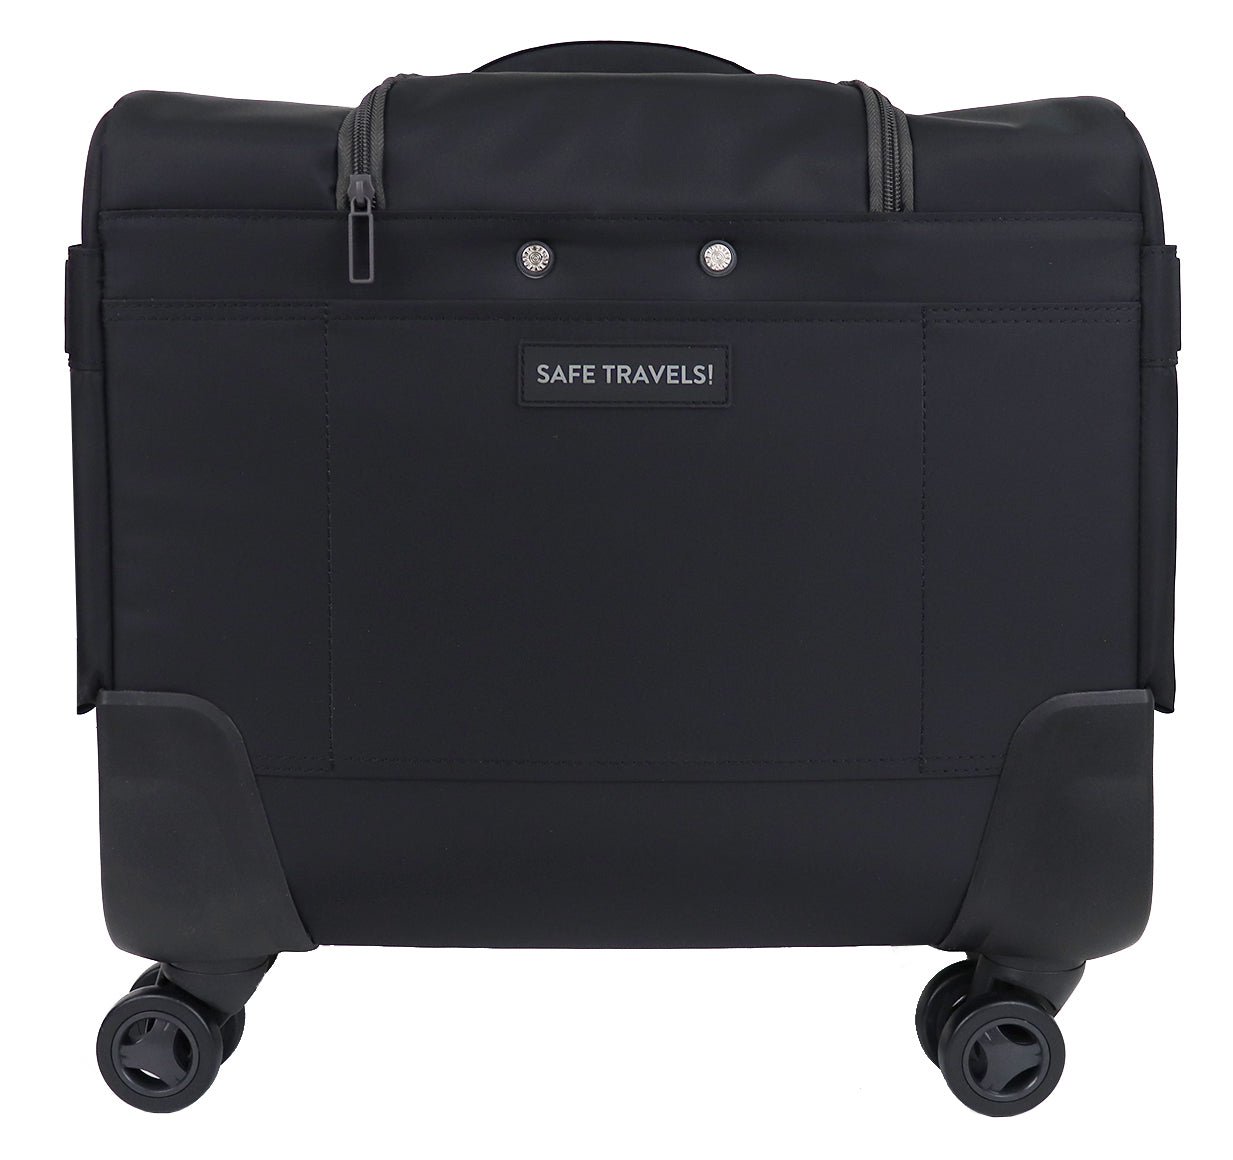 Hedgren Eclipse Sustainable Soft Sided Carry On